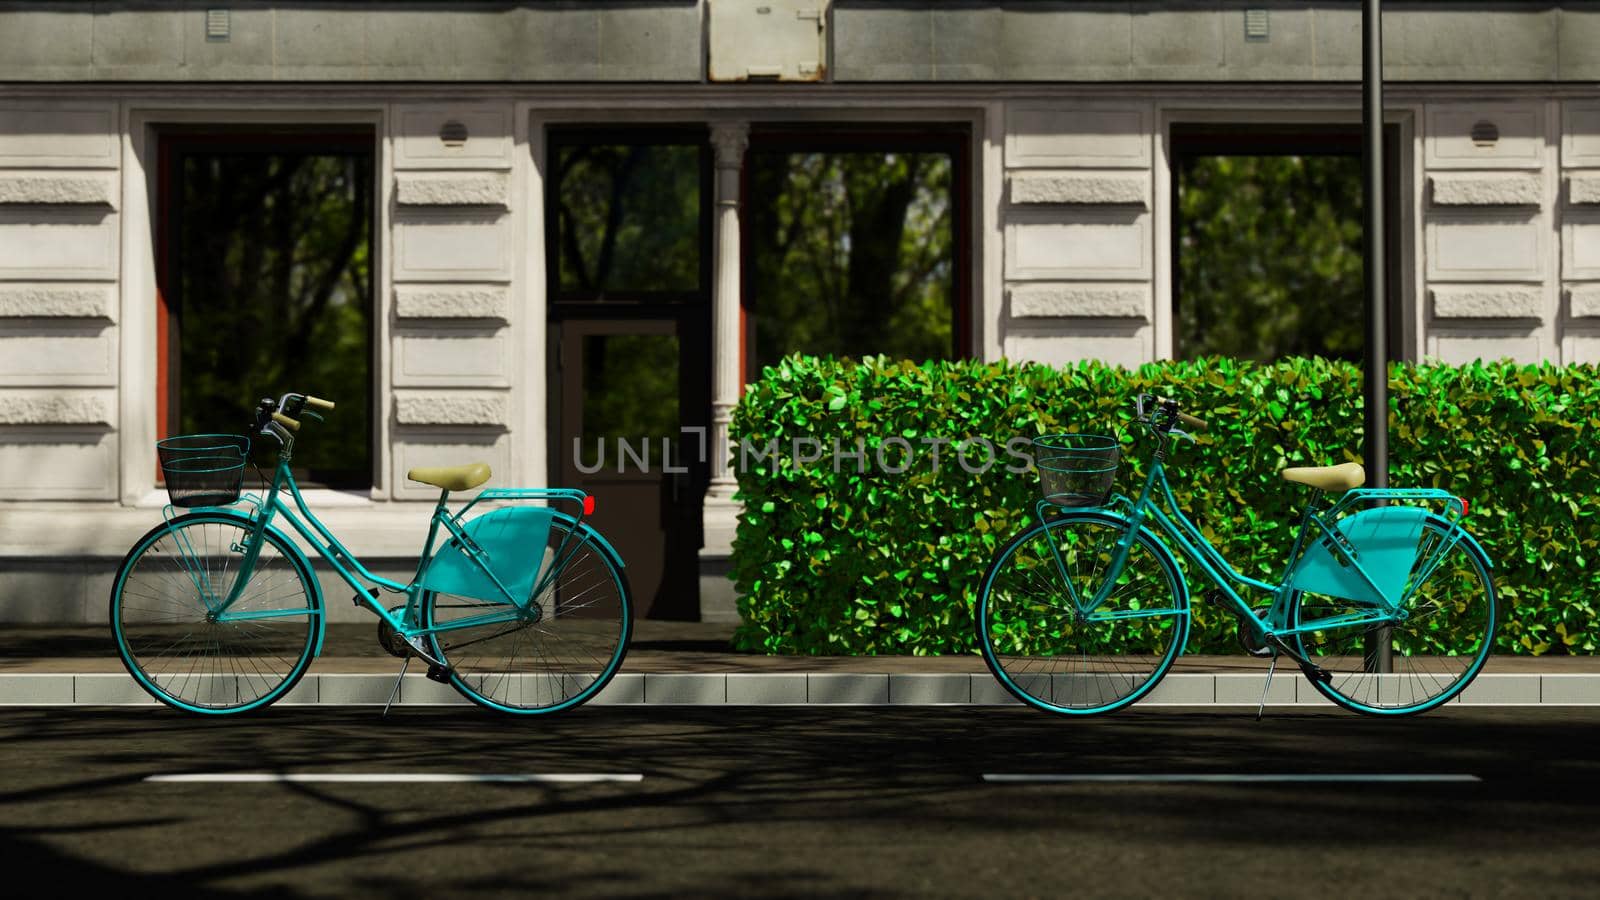 Bicycle For world Car Free Day by urzine